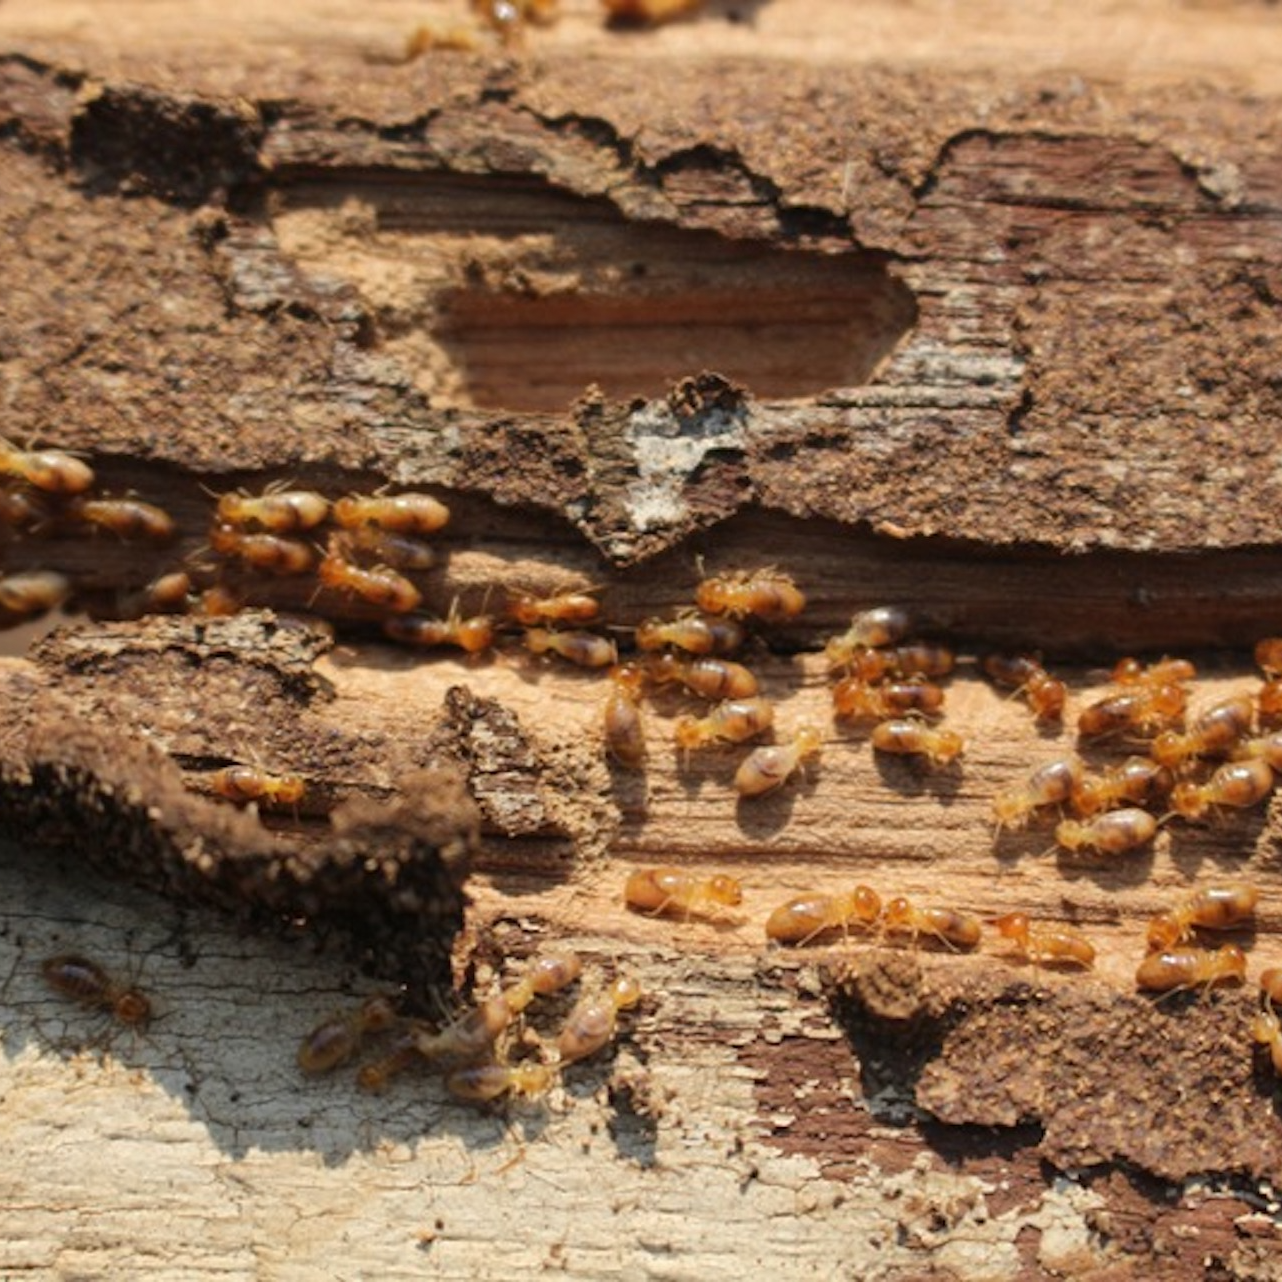 Termites mainly snack on untreated wood